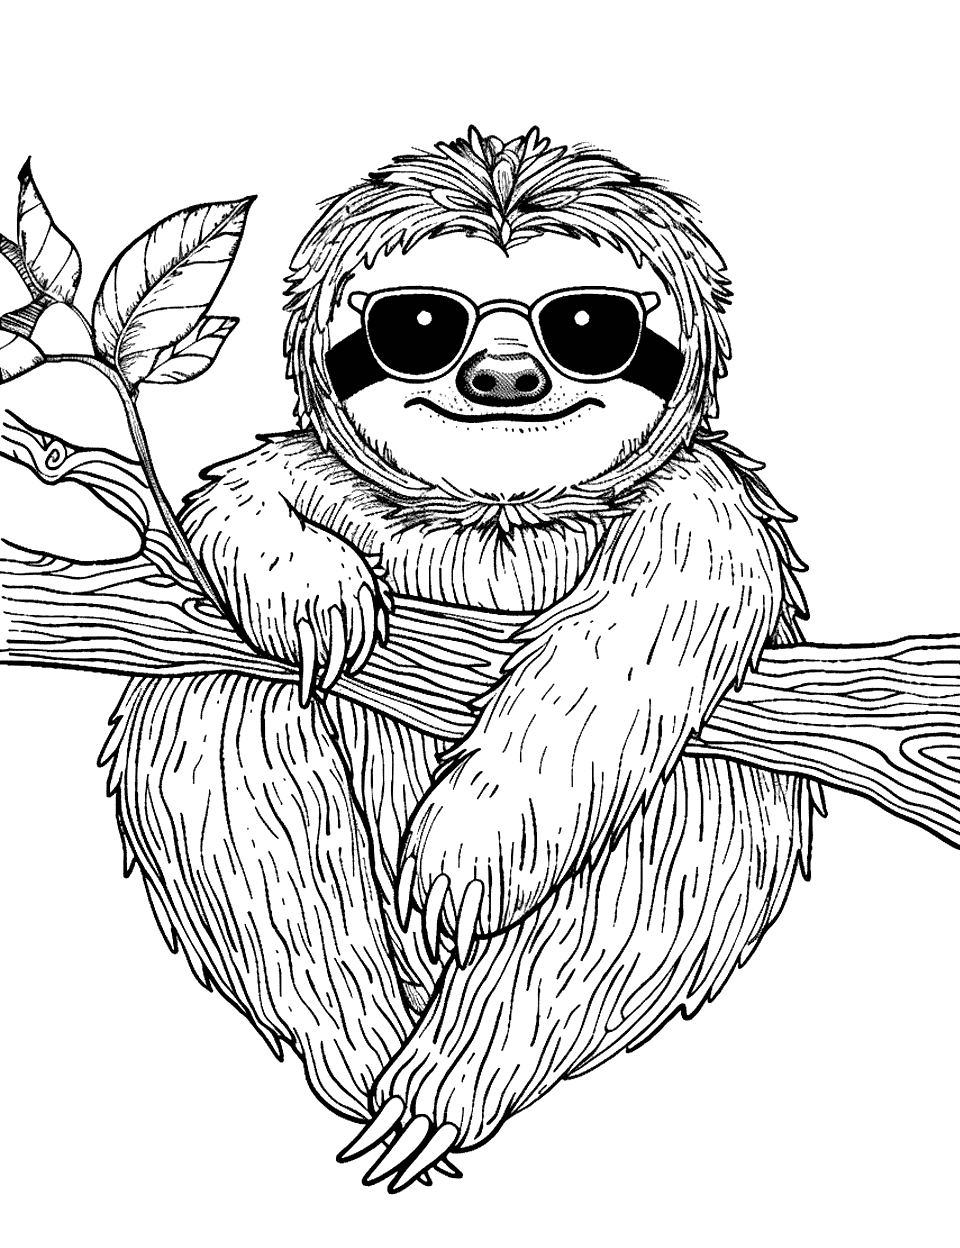 Cool Sloth Wearing Sunglasses Coloring Page - A sloth with a relaxed pose wearing sunglasses, lounging on a sturdy branch, epitomizing coolness.